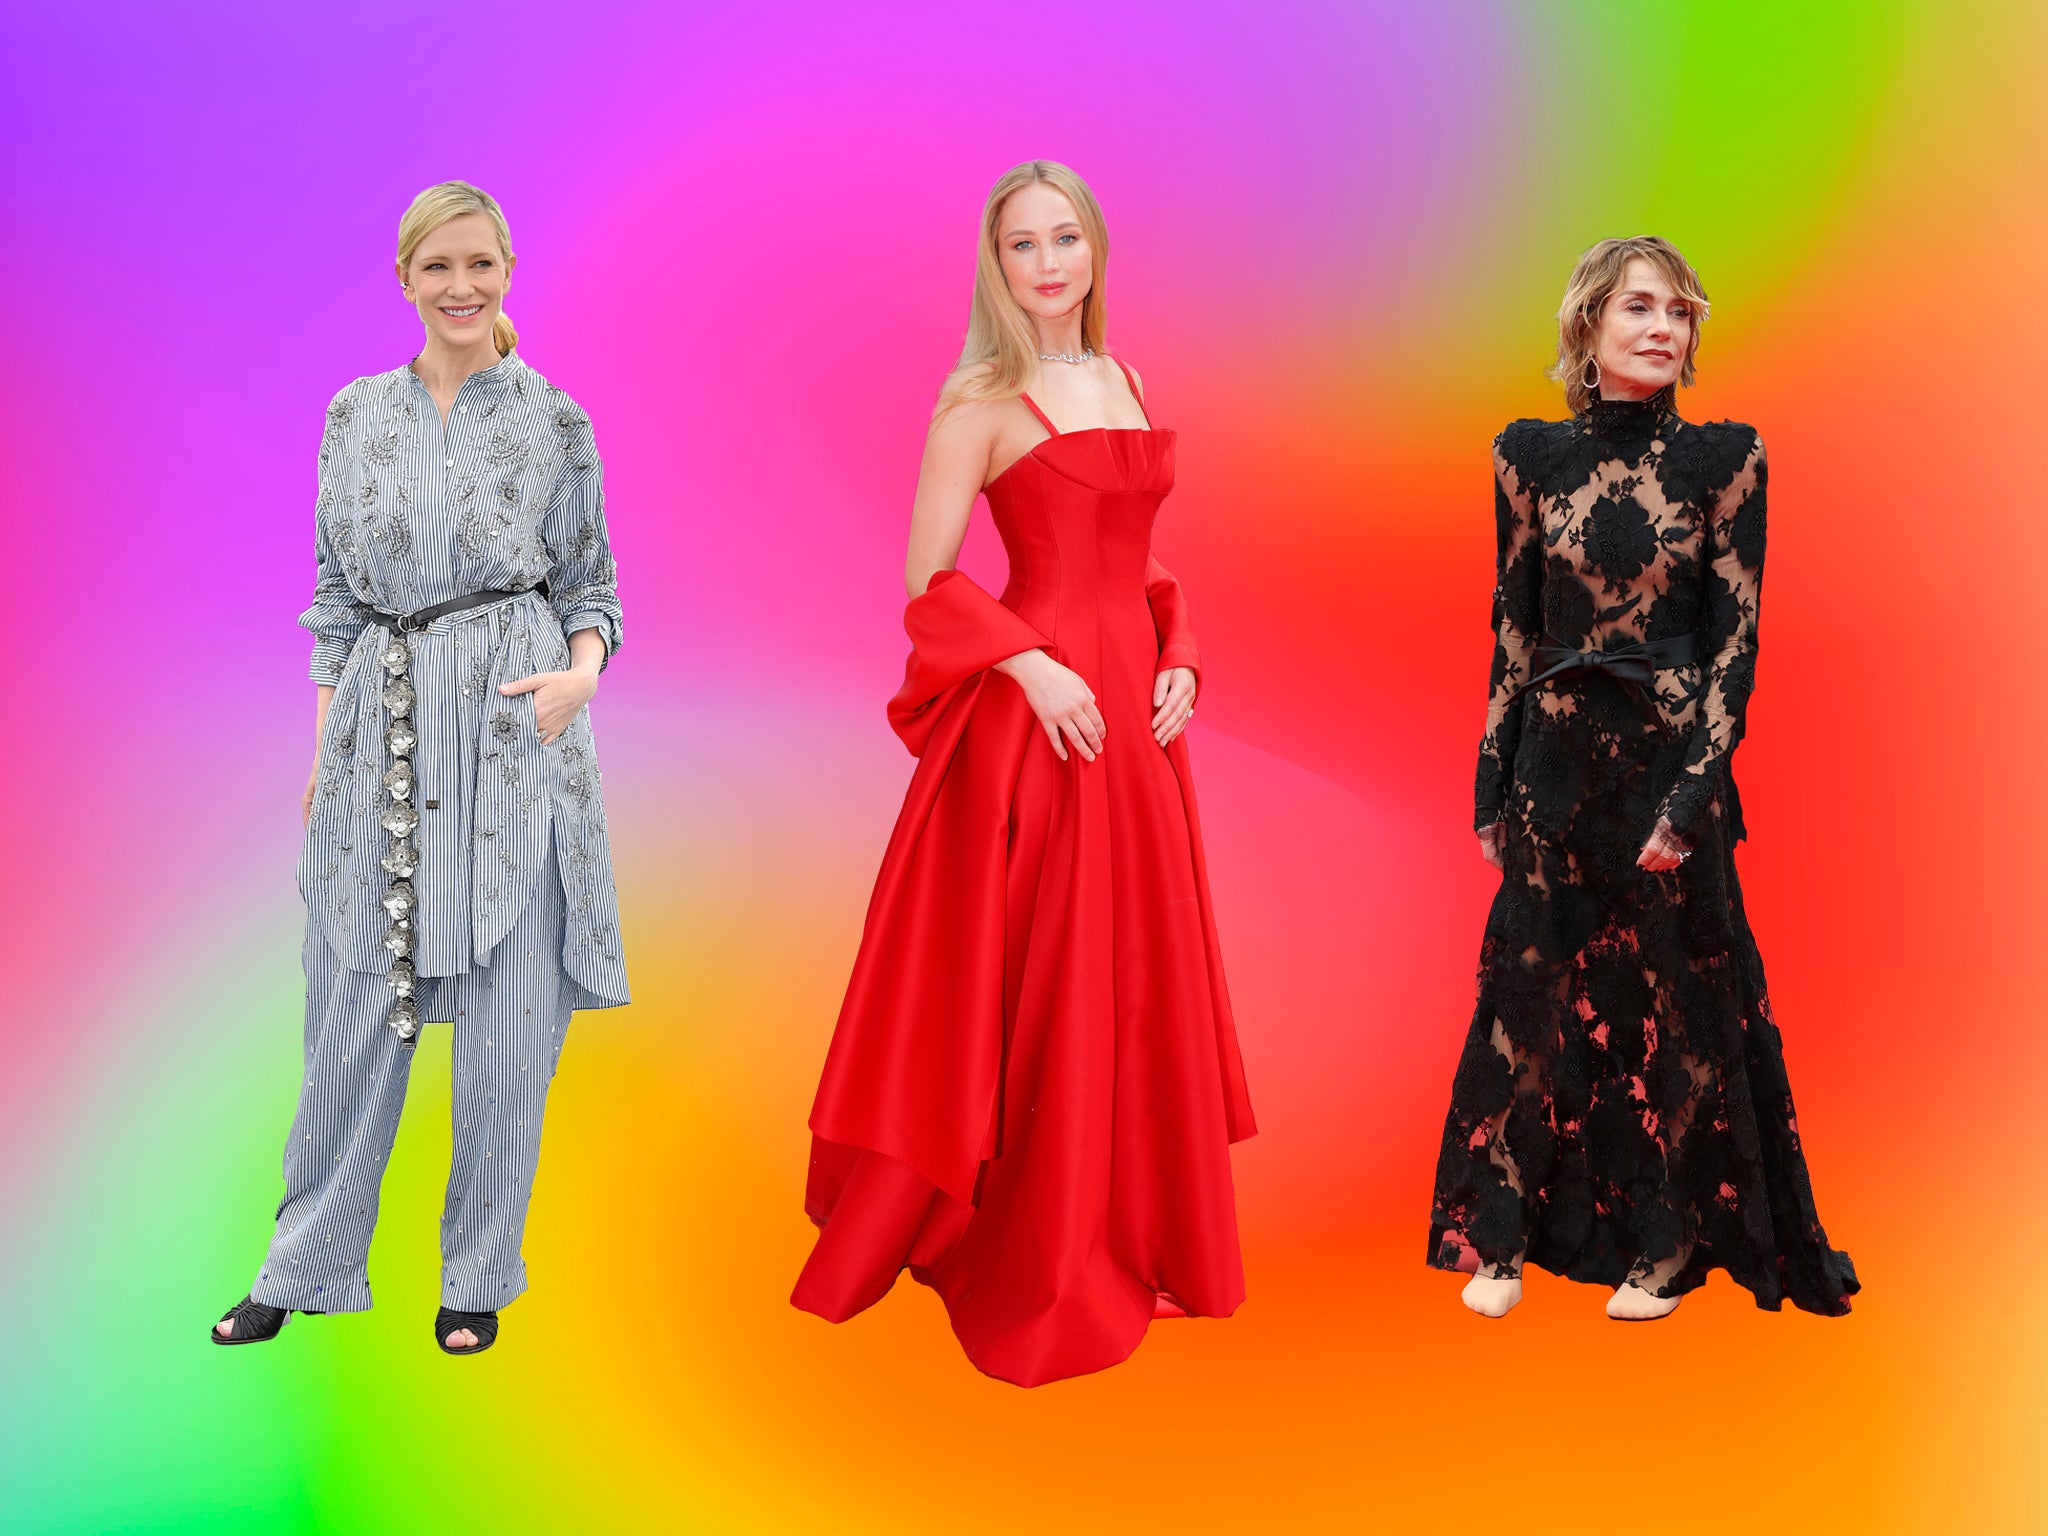 Cate Blanchett, Jennifer Lawrence and Isabelle Huppert are among the stars taking the opportunity to make both sartorial and political statements on the red carpet